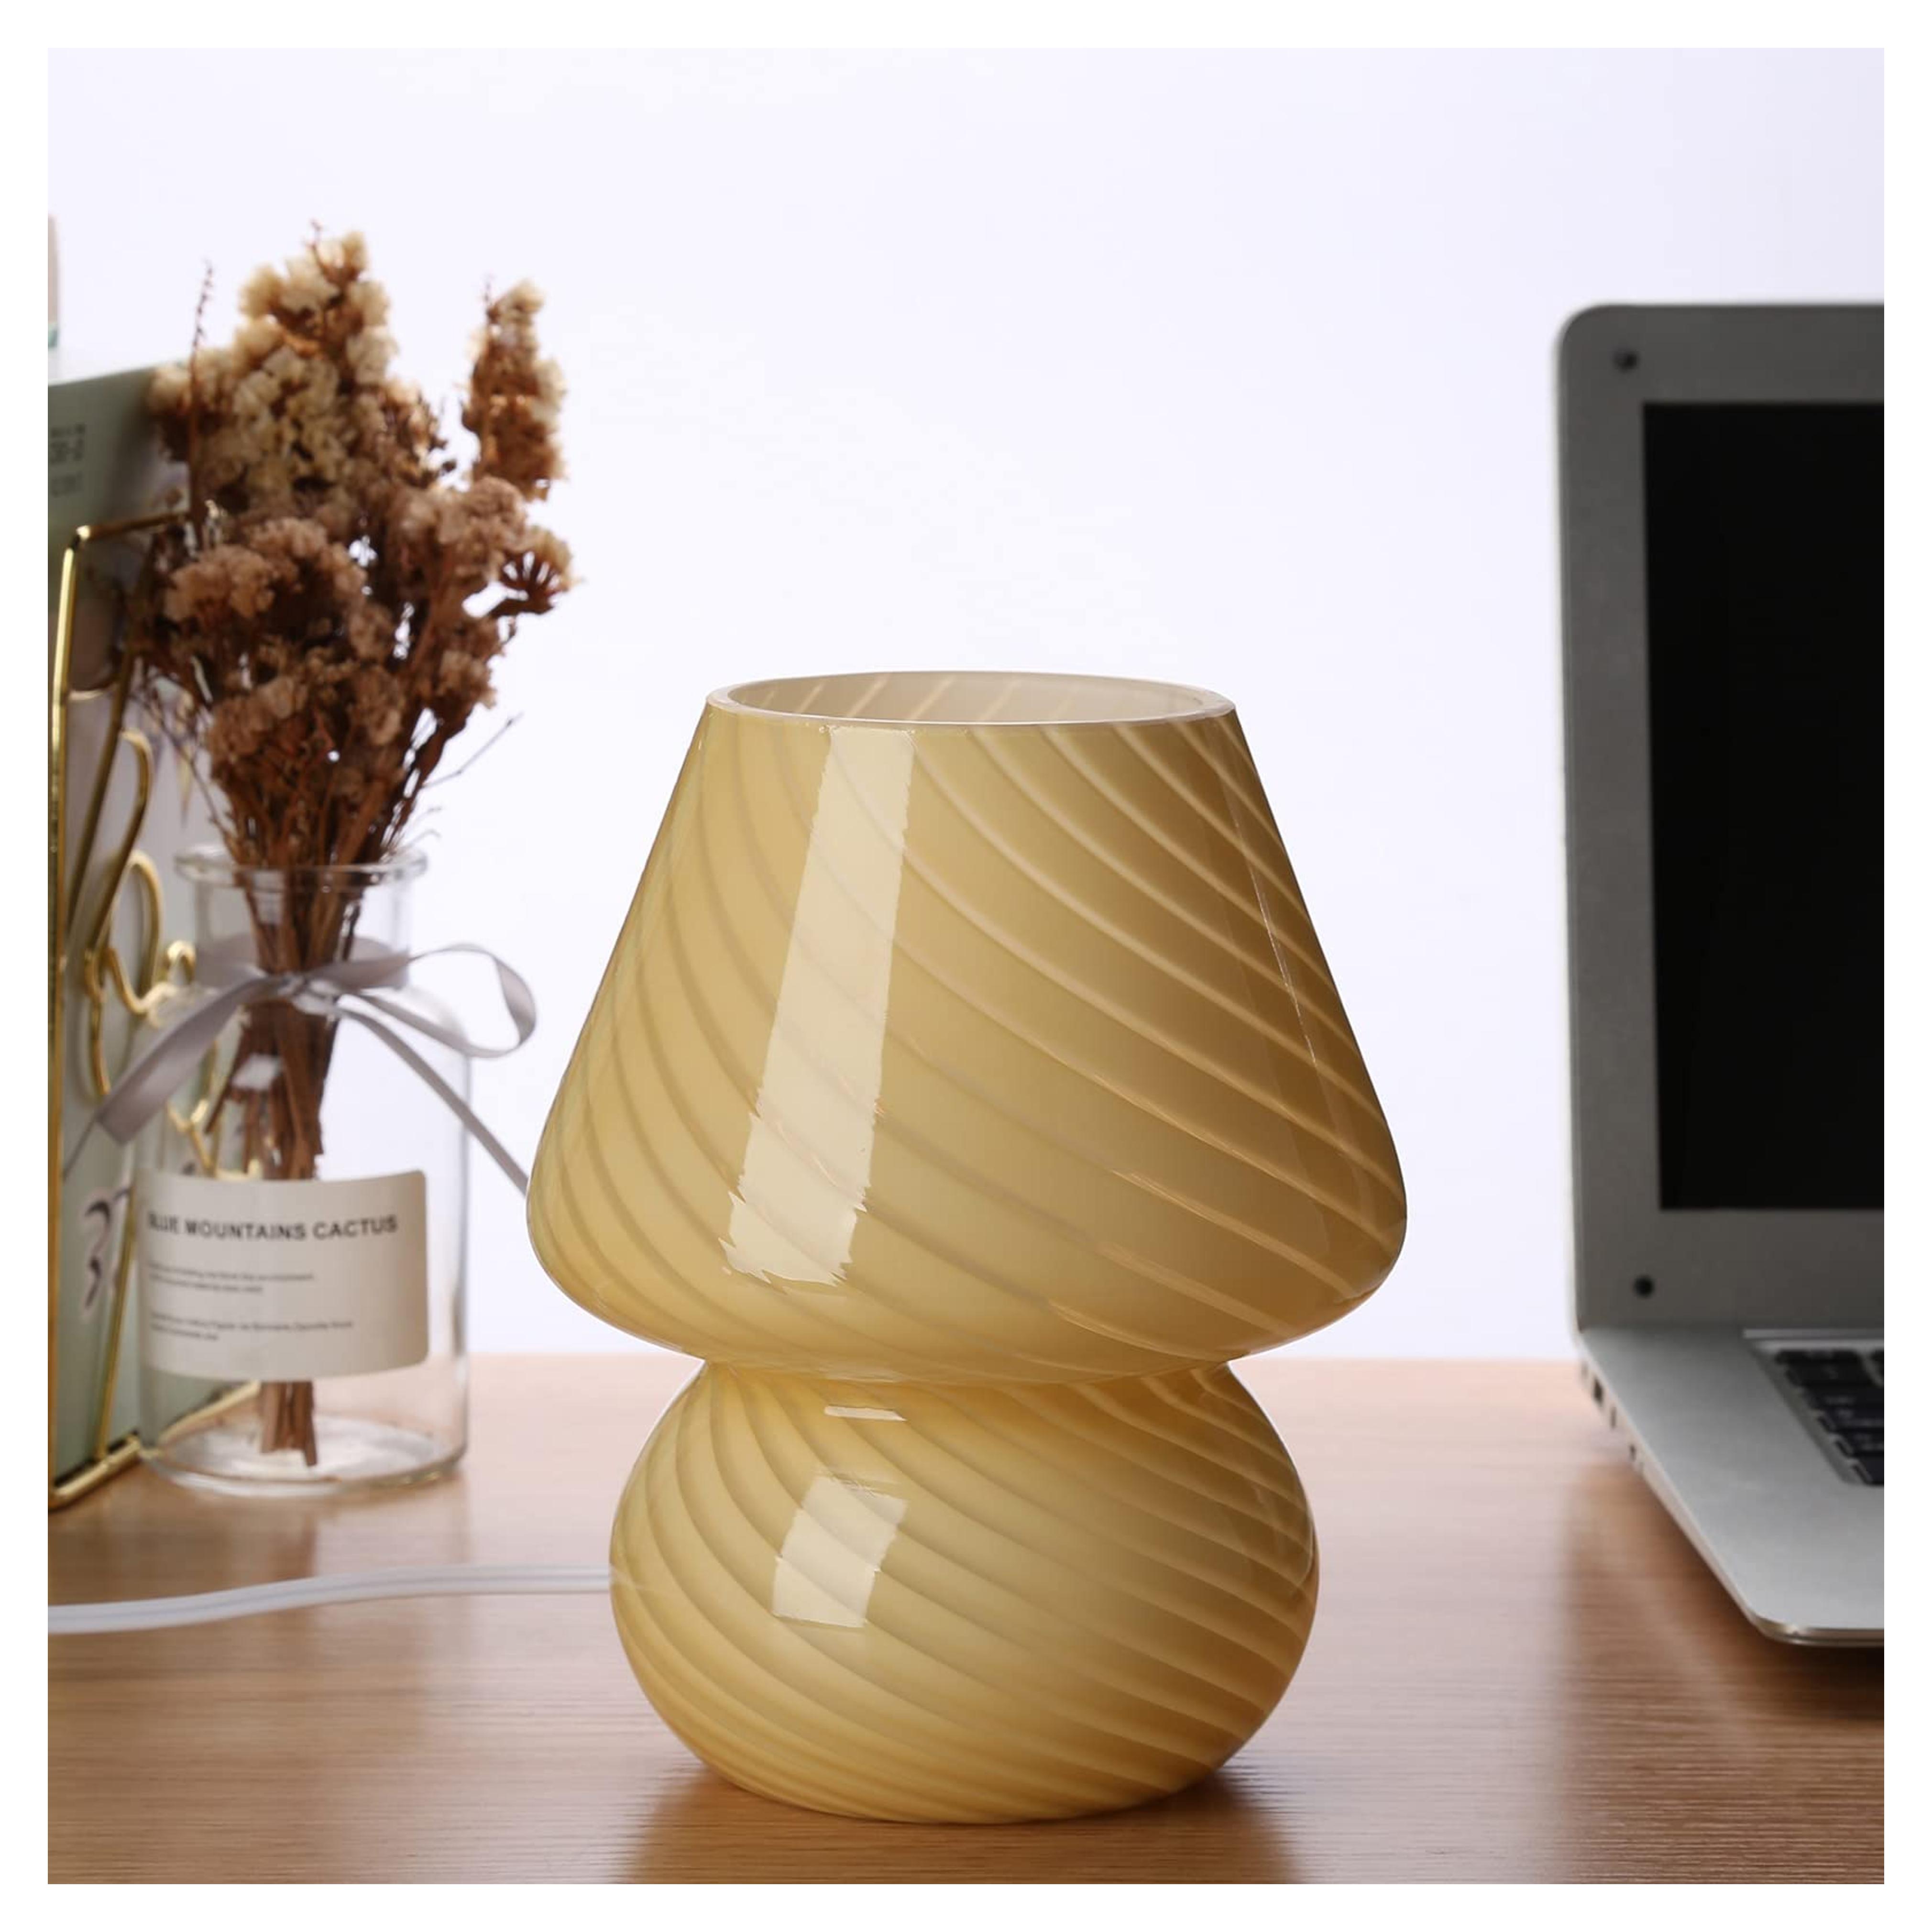 Glass Mushroom Bedside Table Lamp, Yellow Translucent Murano Vintage Style Striped Small Nightstand Desklamp Swirl Light for Home Decor, Dining, Living, Bedroom, Gift (Stripe Yellow) - - Amazon.com